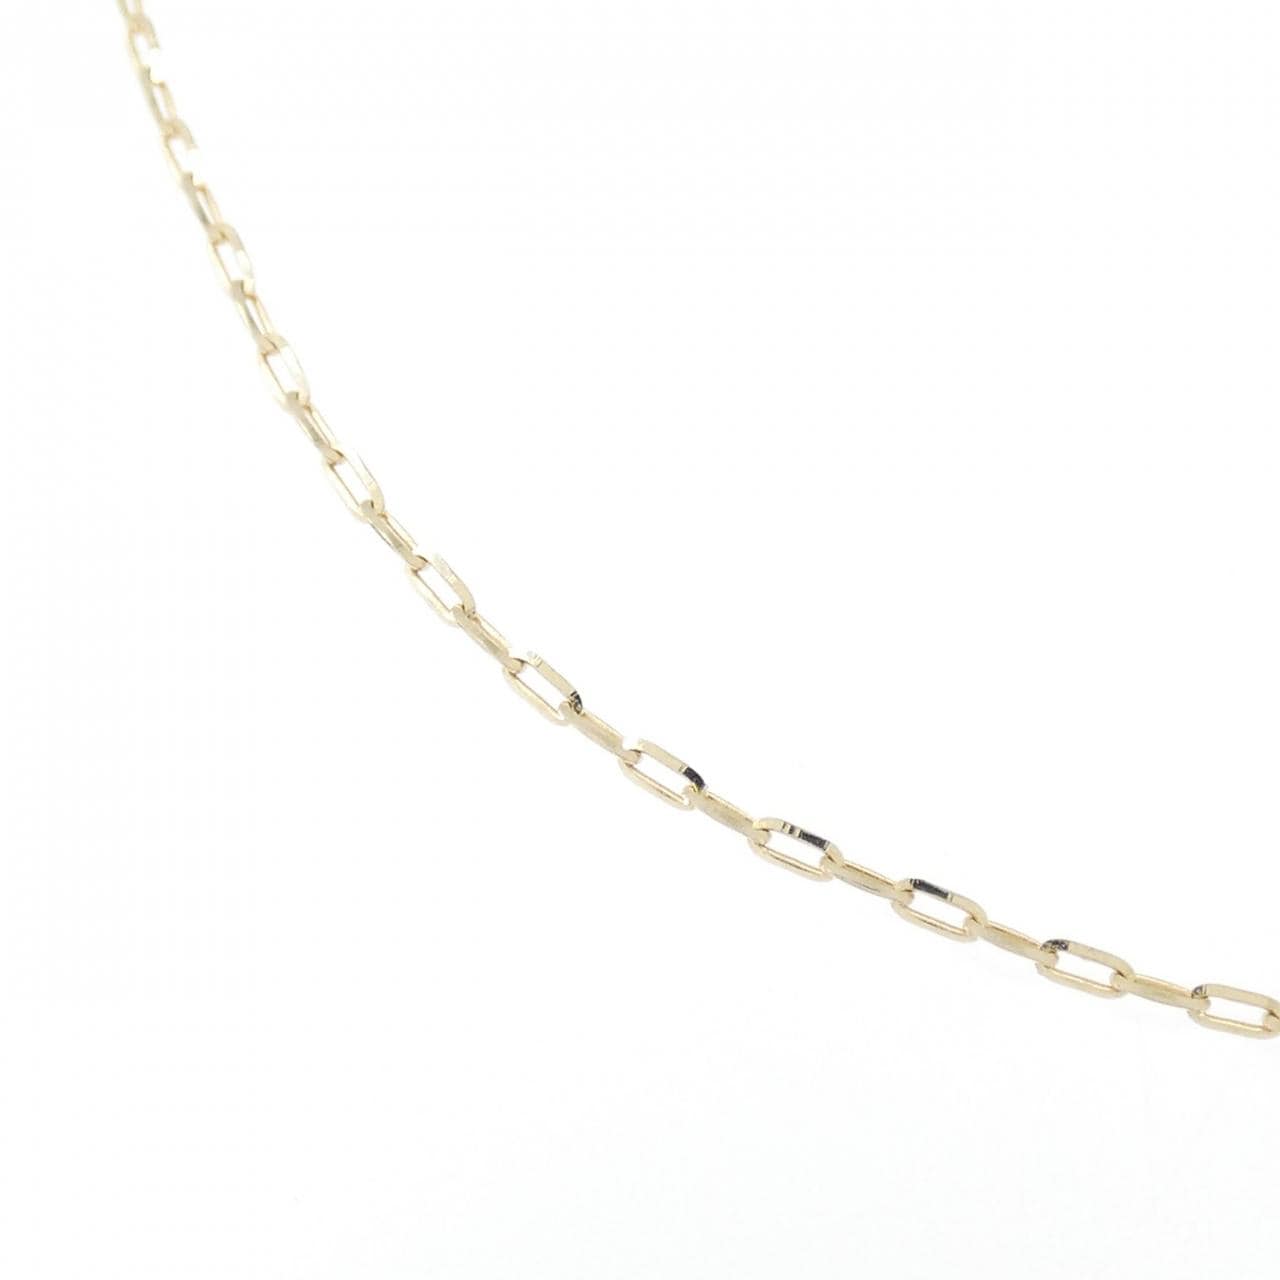 K10YG chain necklace